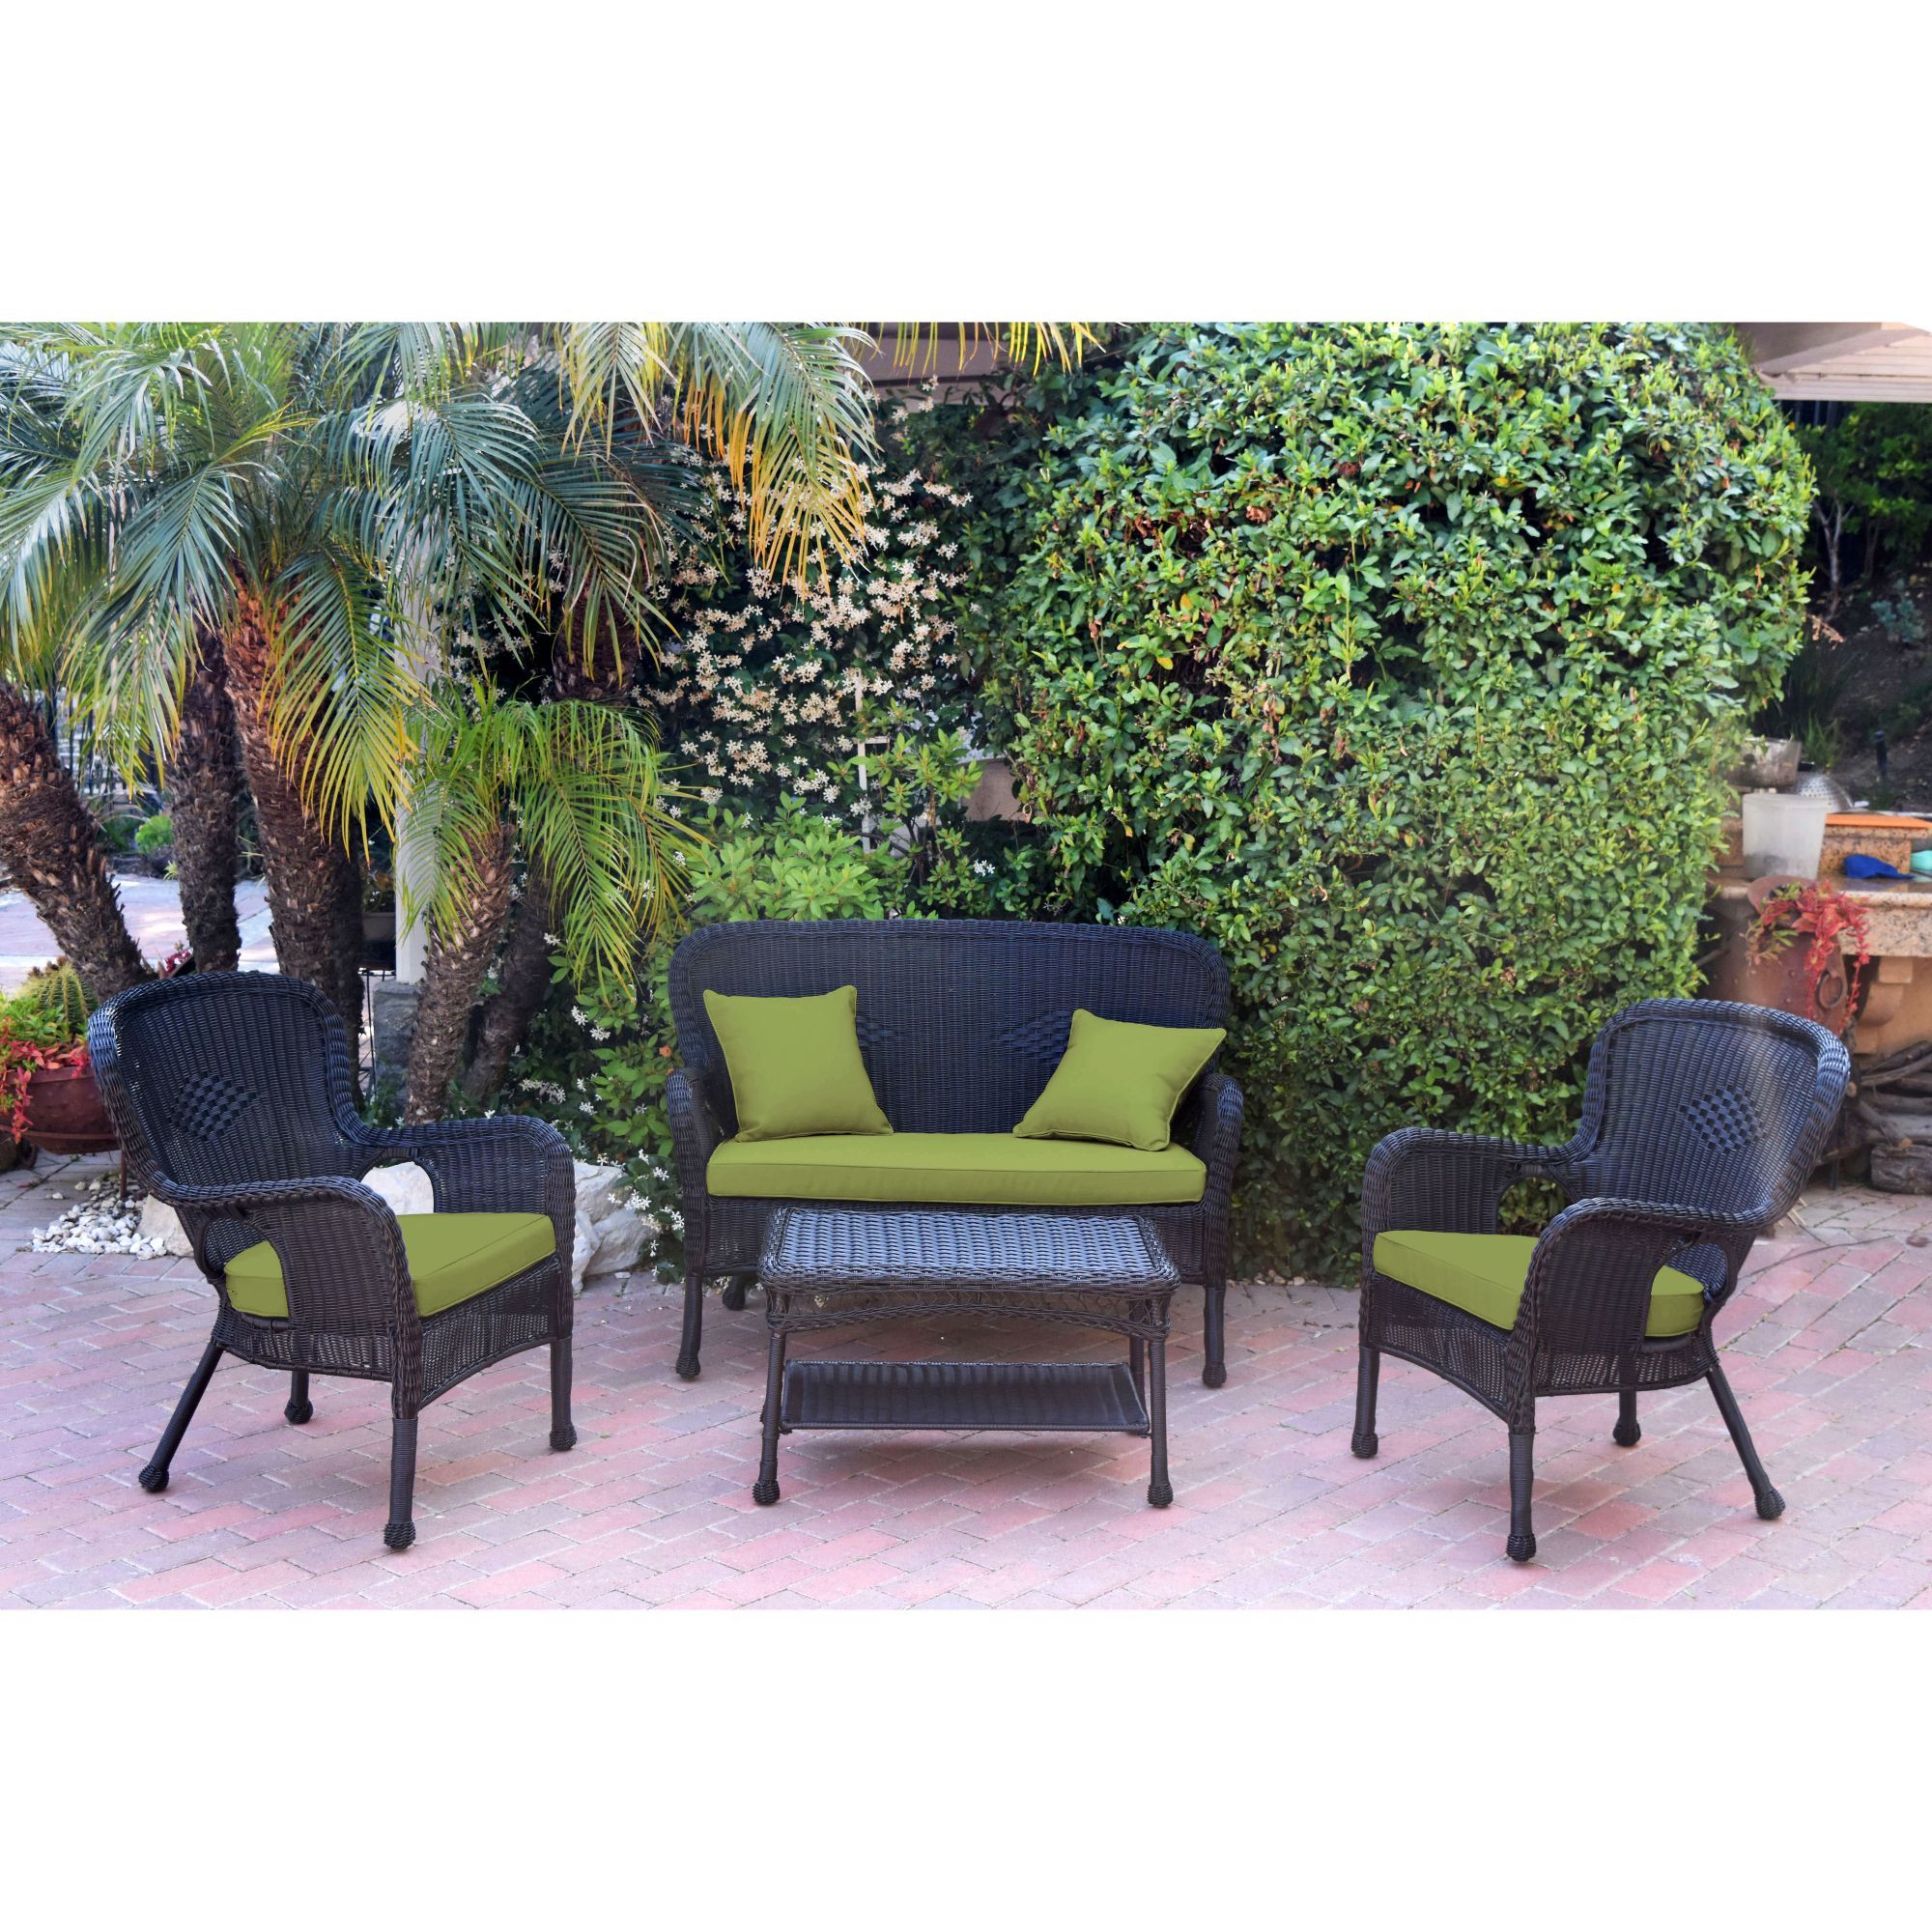 4 Piece Black Solid Wicker Outdoor Furniture Patio Conversation Set With Black Cushion Patio Conversation Sets (View 10 of 15)